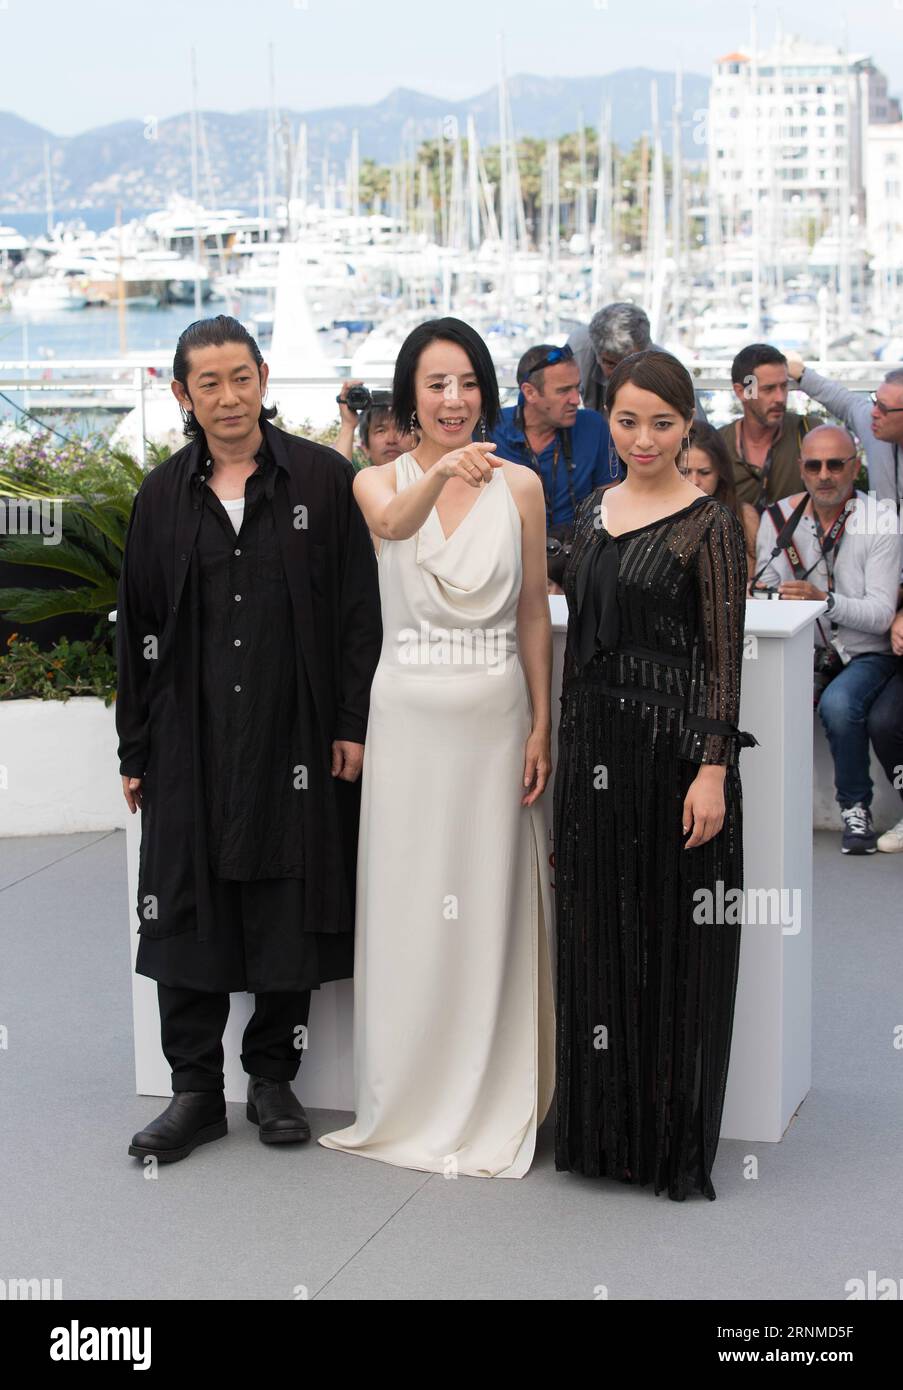 (170523) -- CANNES, May 23, 2017 -- Actor Masatoshi Nagase, actresses Misuzu Kanno and Atame Misaki (L-R) pose for a photocall of the film Hikari (Radiance) during the 70th Cannes Film Festival at Palais des Festivals in Cannes, France, on May 23, 2017. ) (dtf) FRANCE-CANNES-70TH CANNES FILM FESTIVAL-HIKARI XuxJinquan PUBLICATIONxNOTxINxCHN   Cannes May 23 2017 Actor Masatoshi NAGASE actresses  Kanno and Atame Misaki l r Pose for a photo call of The Film Hikari Radiance during The 70th Cannes Film Festival AT Palais the Festivals in Cannes France ON May 23 2017 dtf France Cannes 70th Cannes Fi Stock Photo